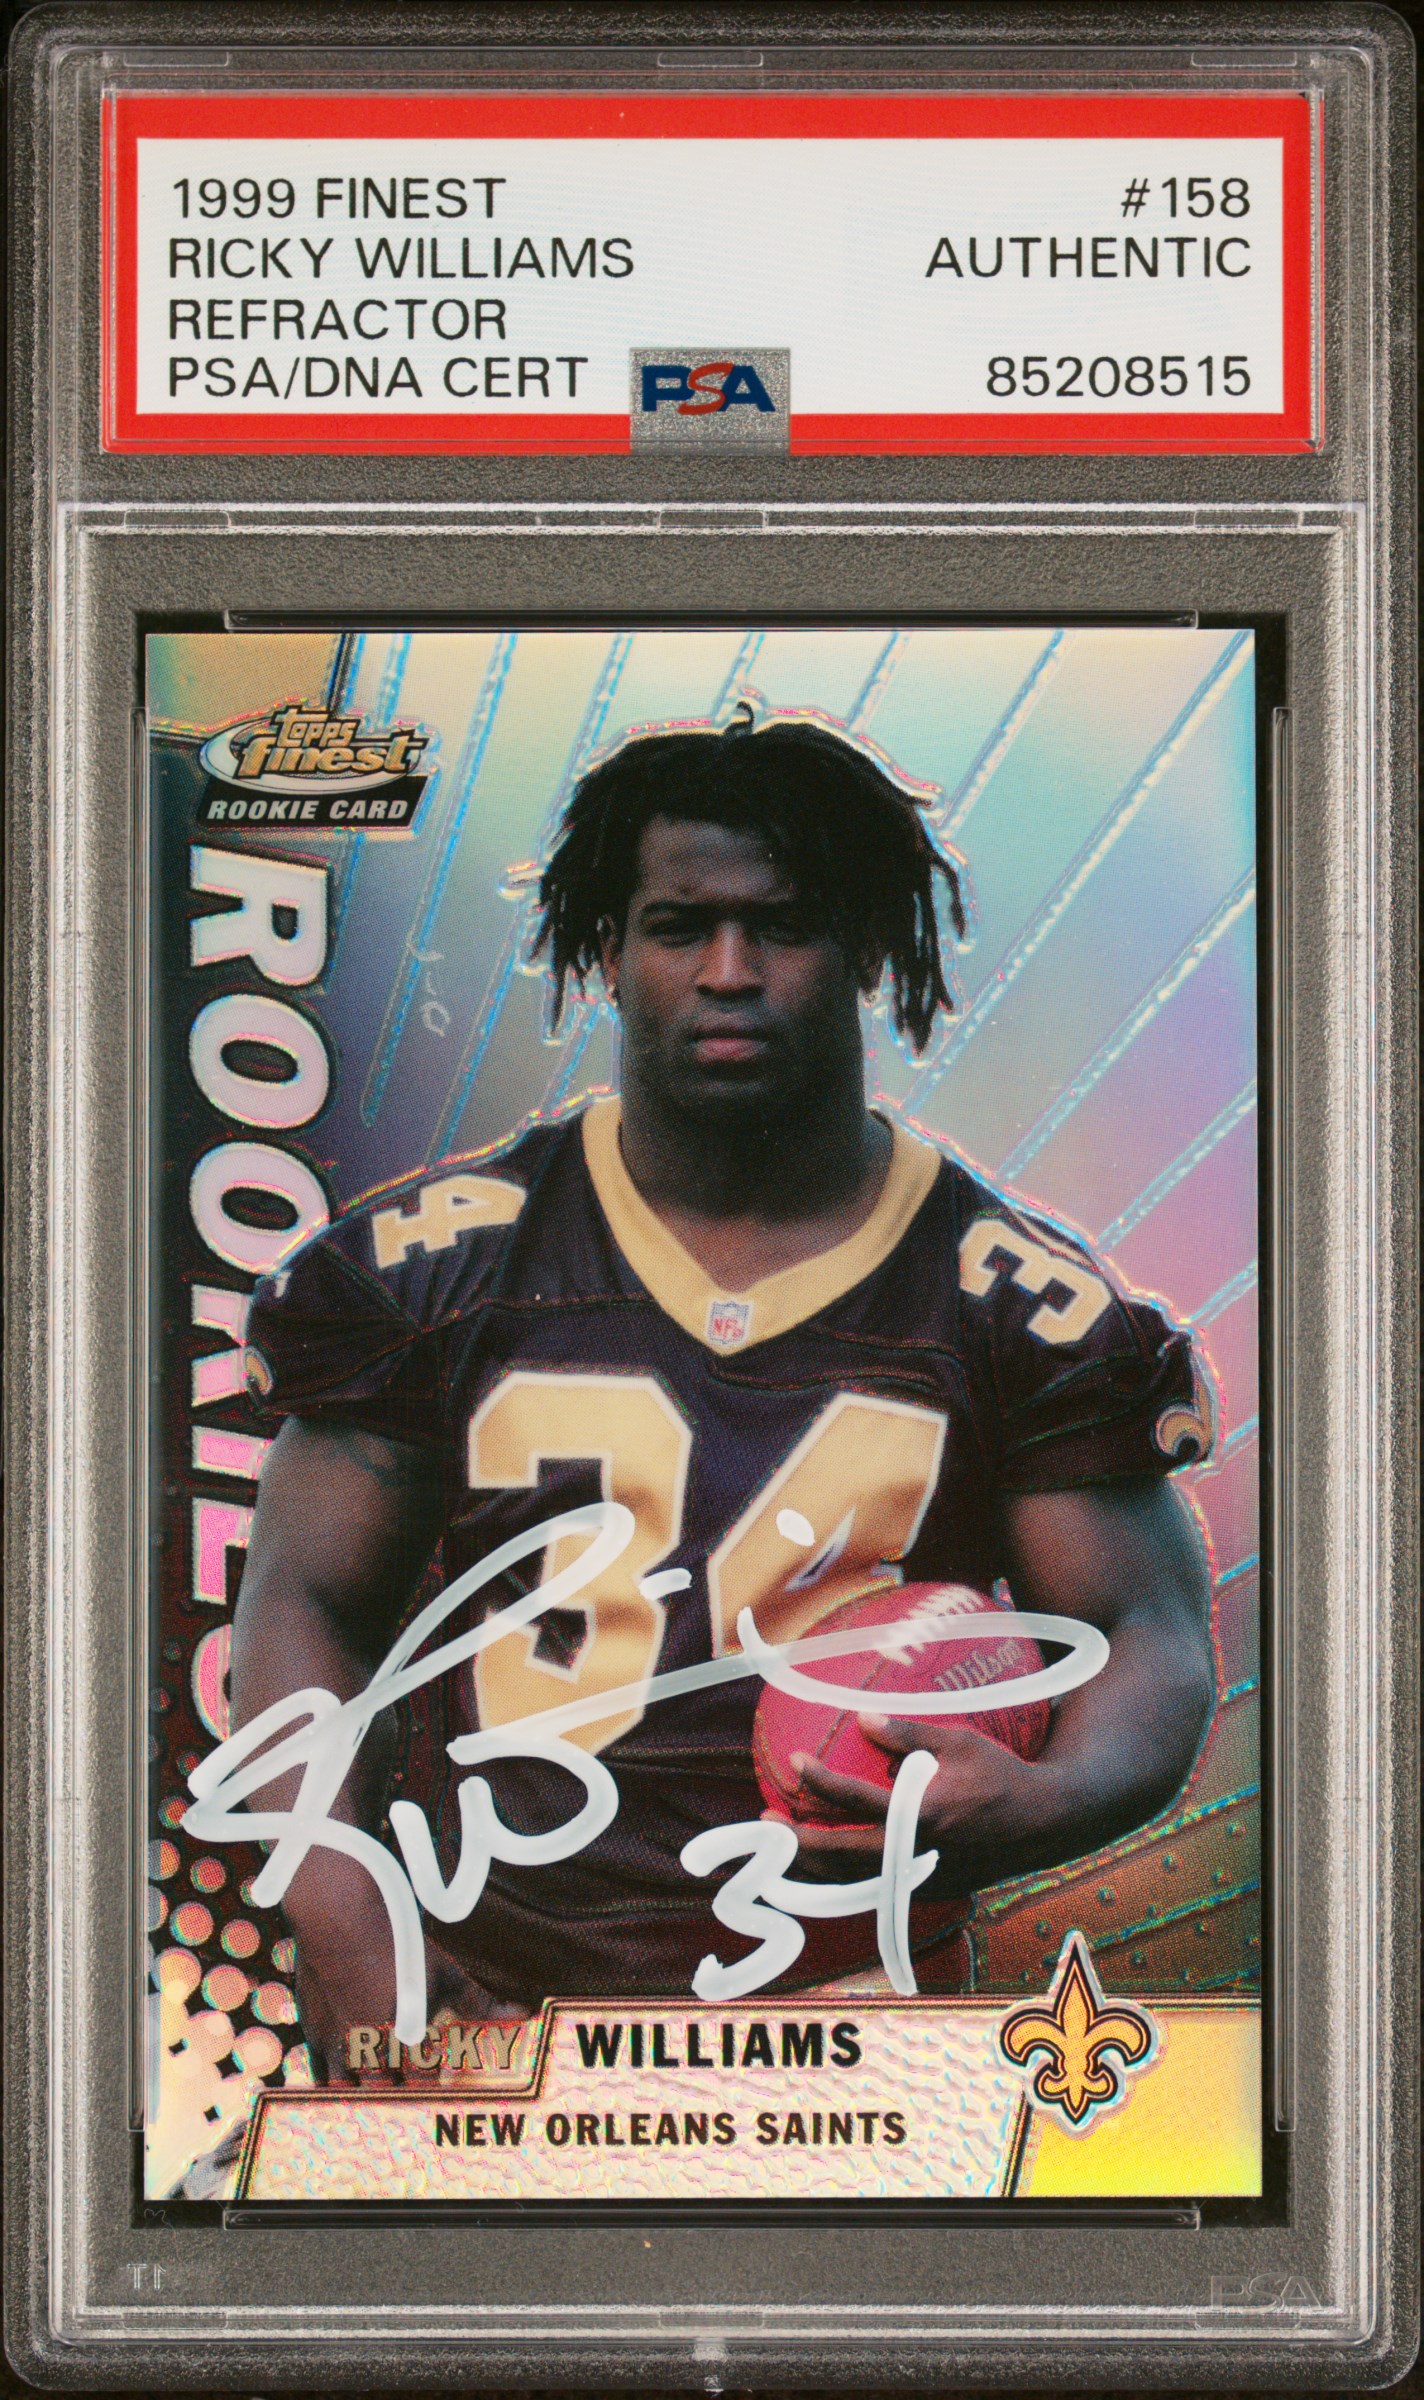 Ricky Williams 1999 Topps Finest Refractor Signed Rookie Card #158 Auto PSA